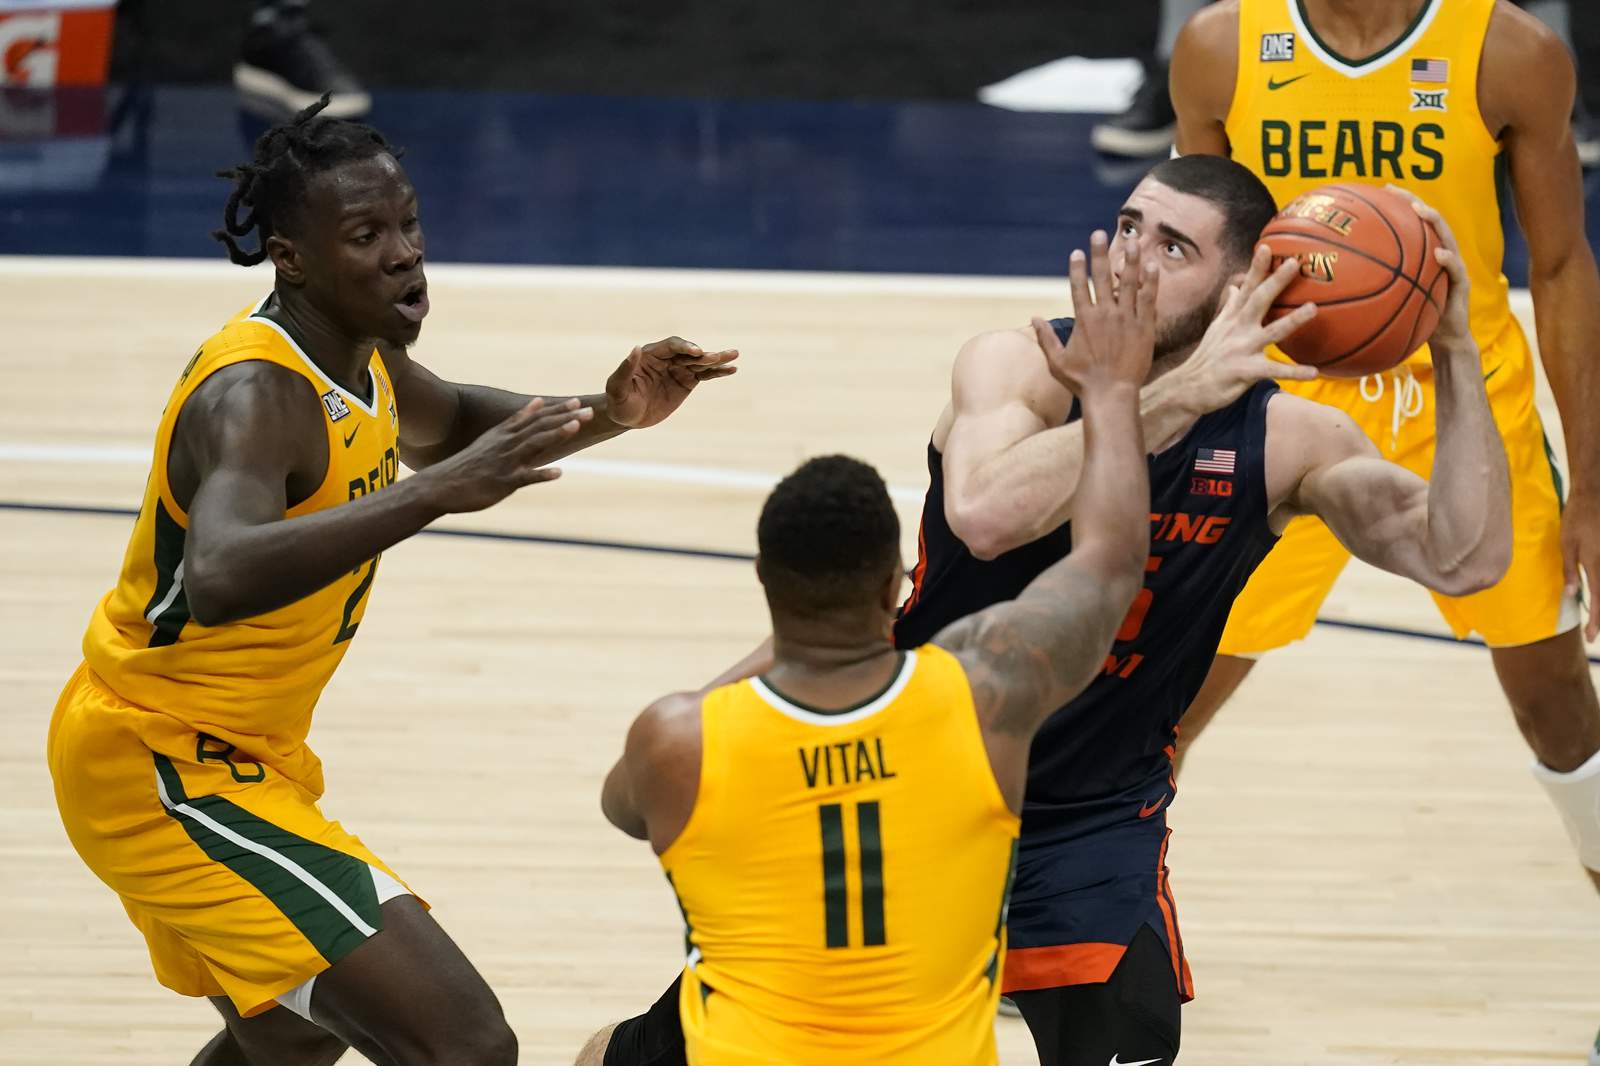 No. 2 Baylor uses stout defense to get past No. 5 Illinois